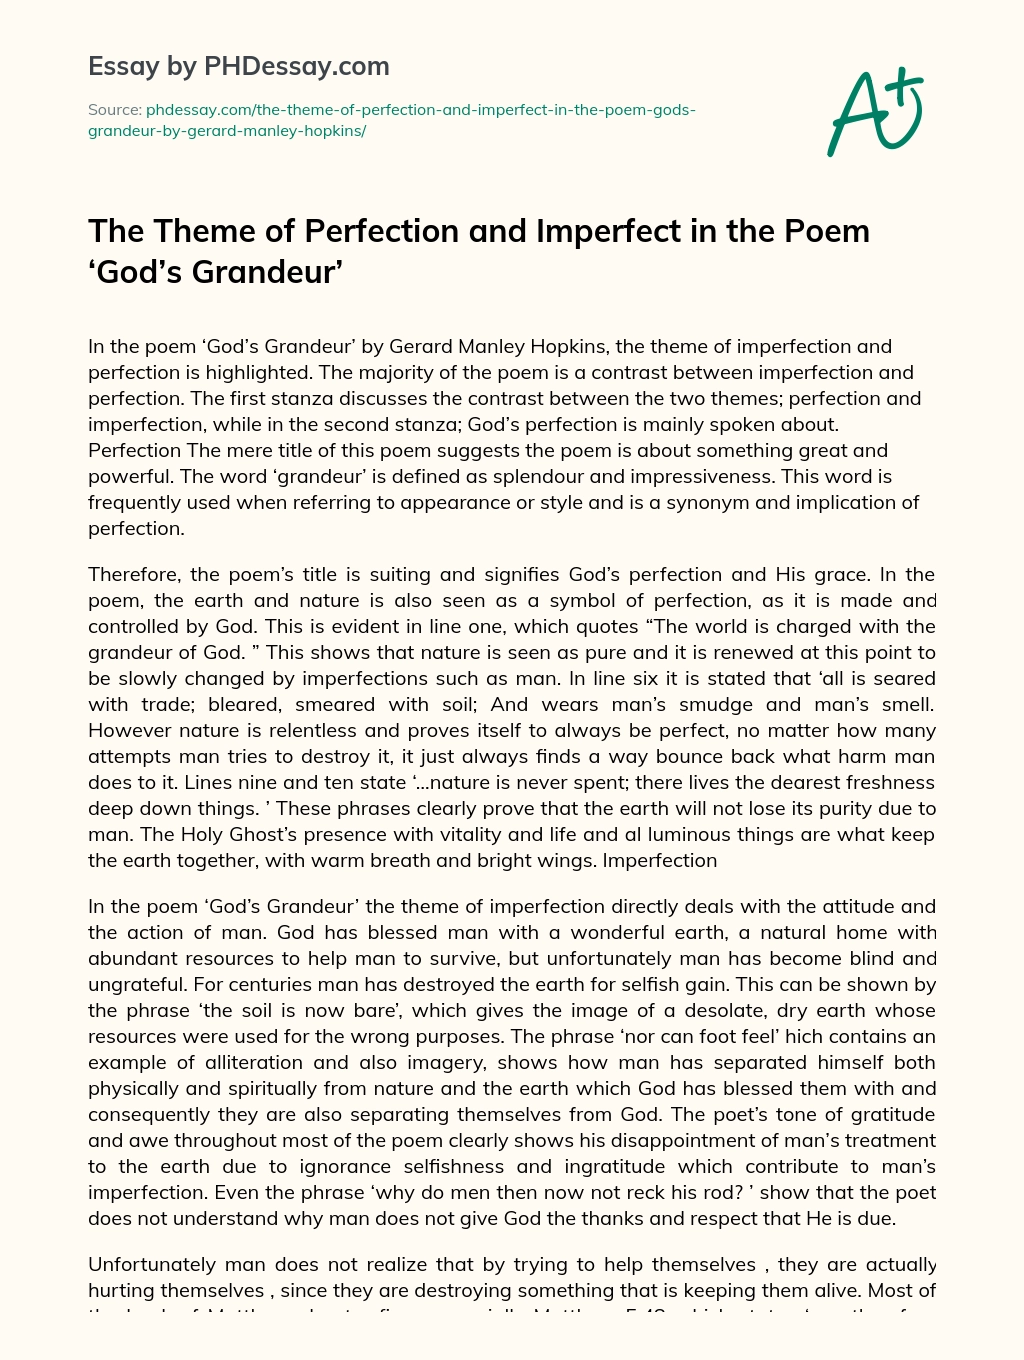 The Theme of Perfection and Imperfect in the Poem ‘God’s Grandeur’ essay